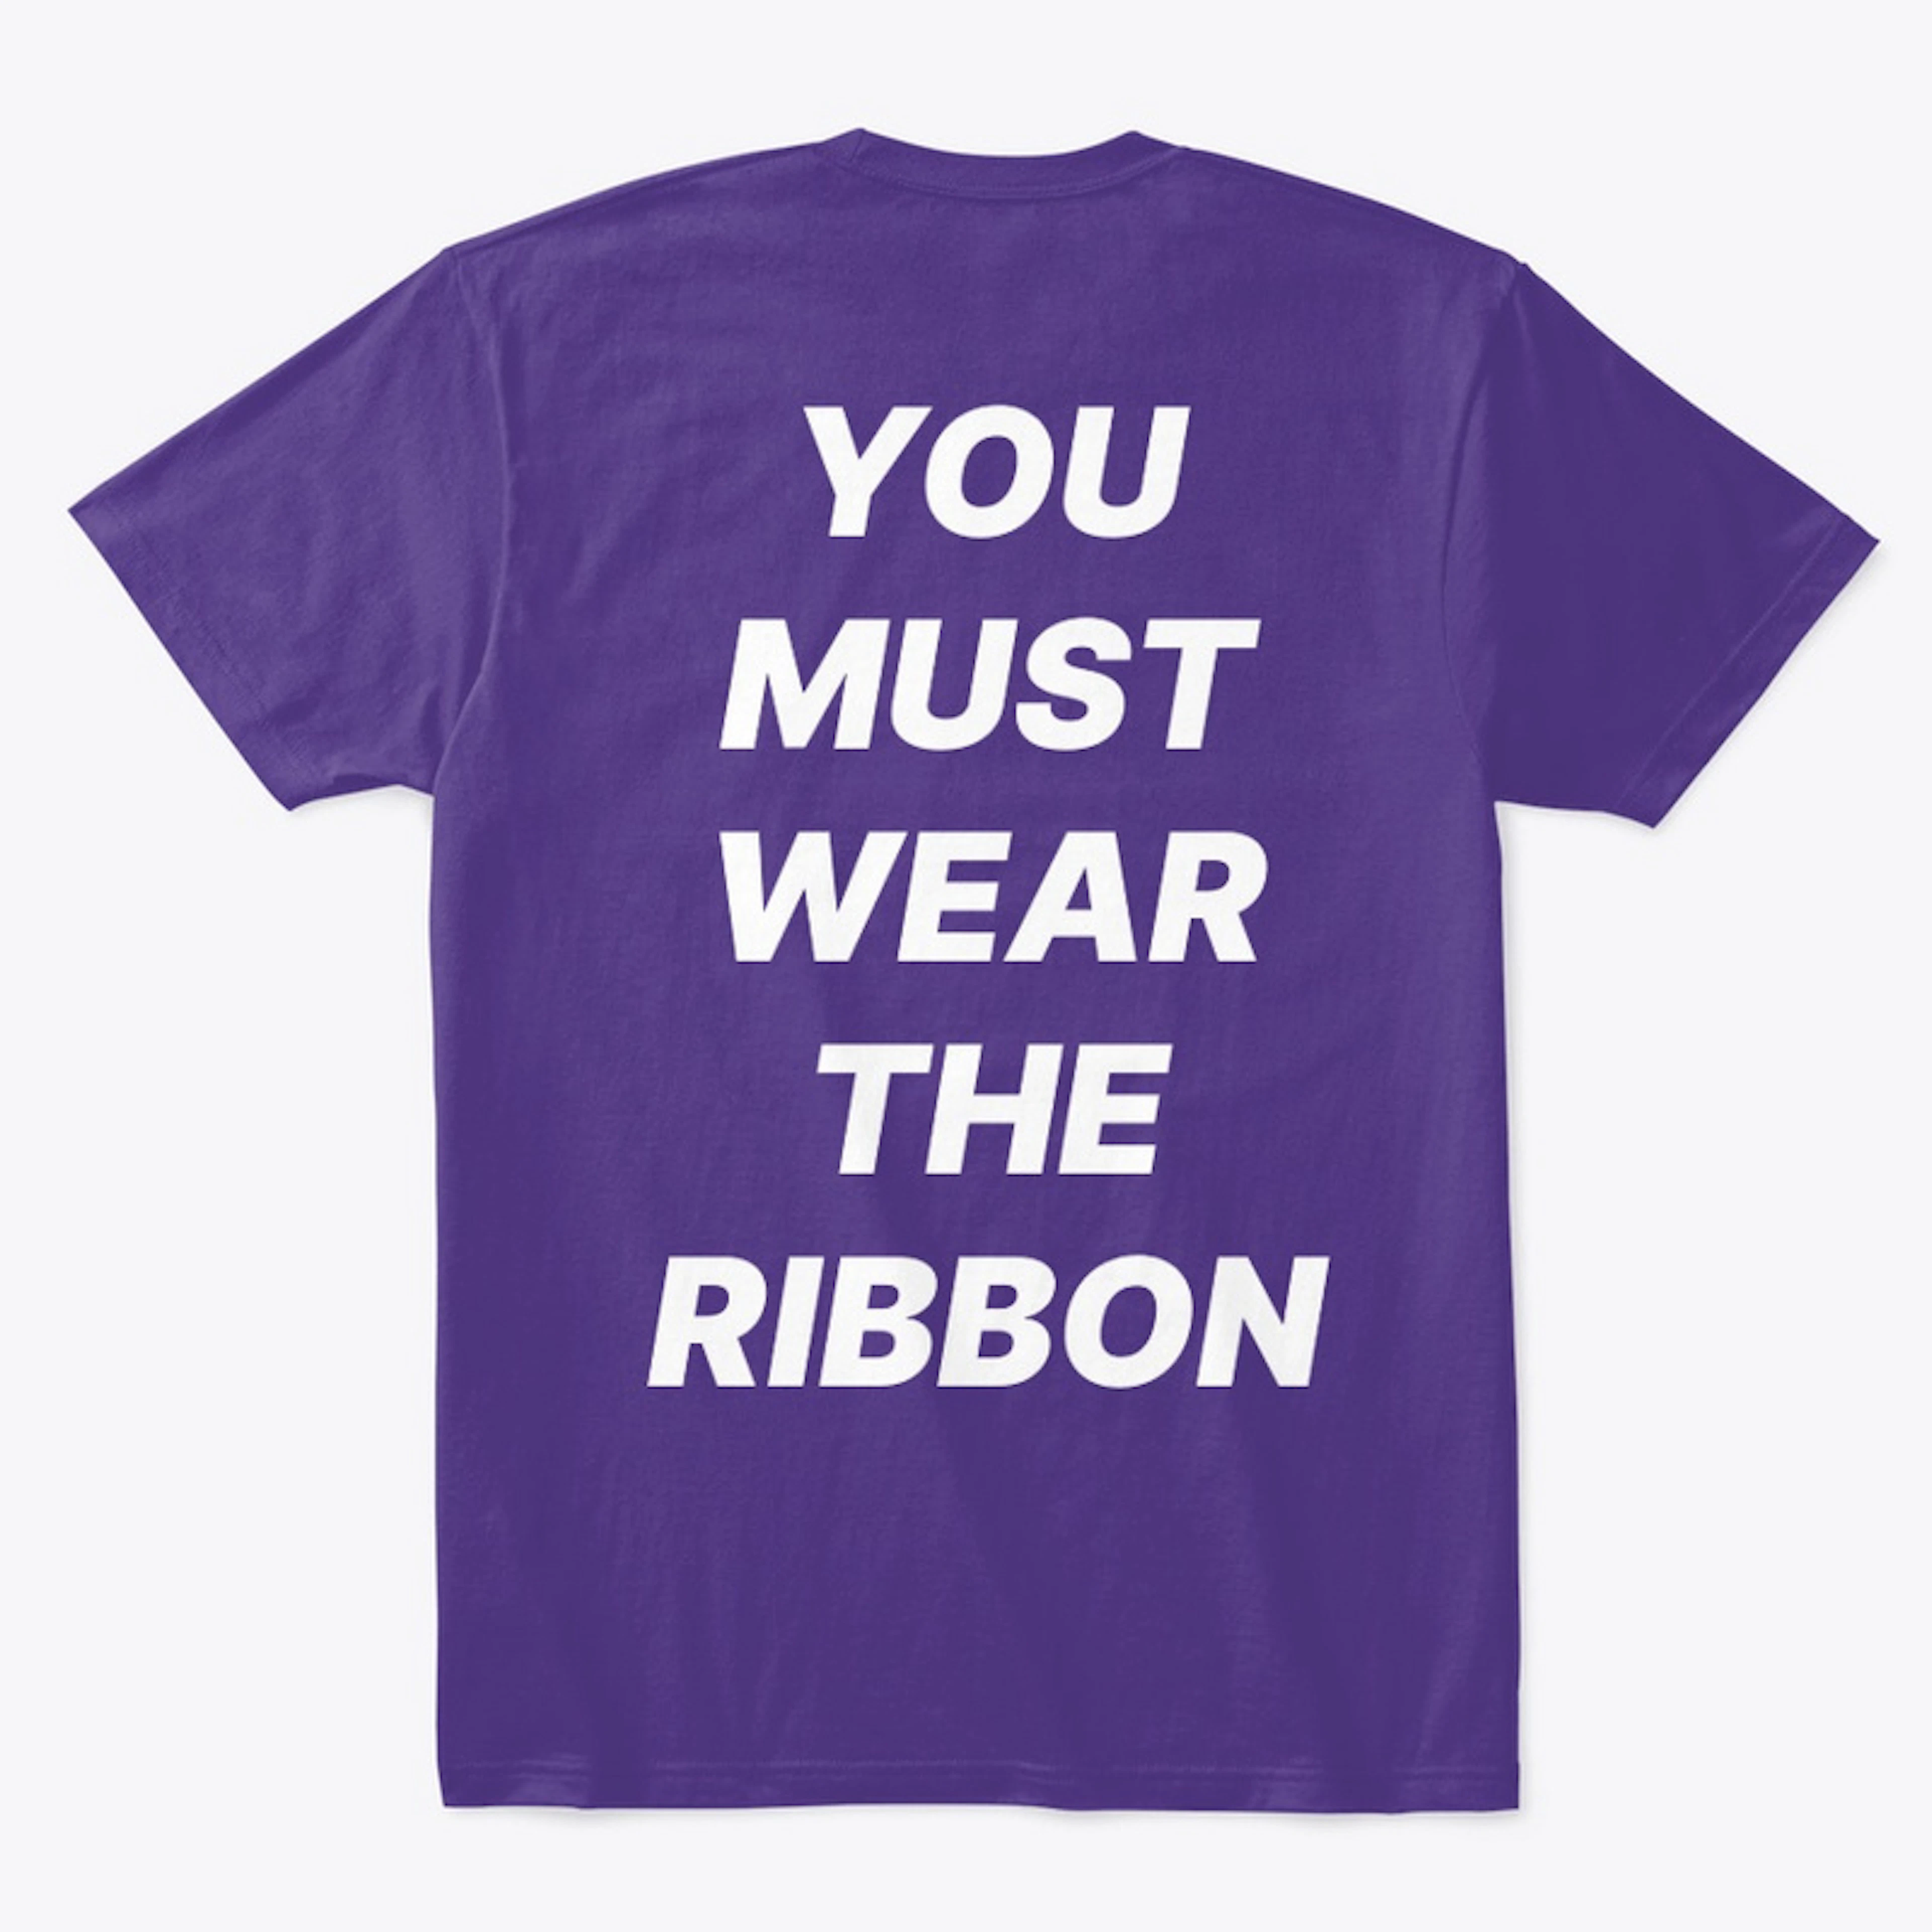 Wearing the ribbon (solid)